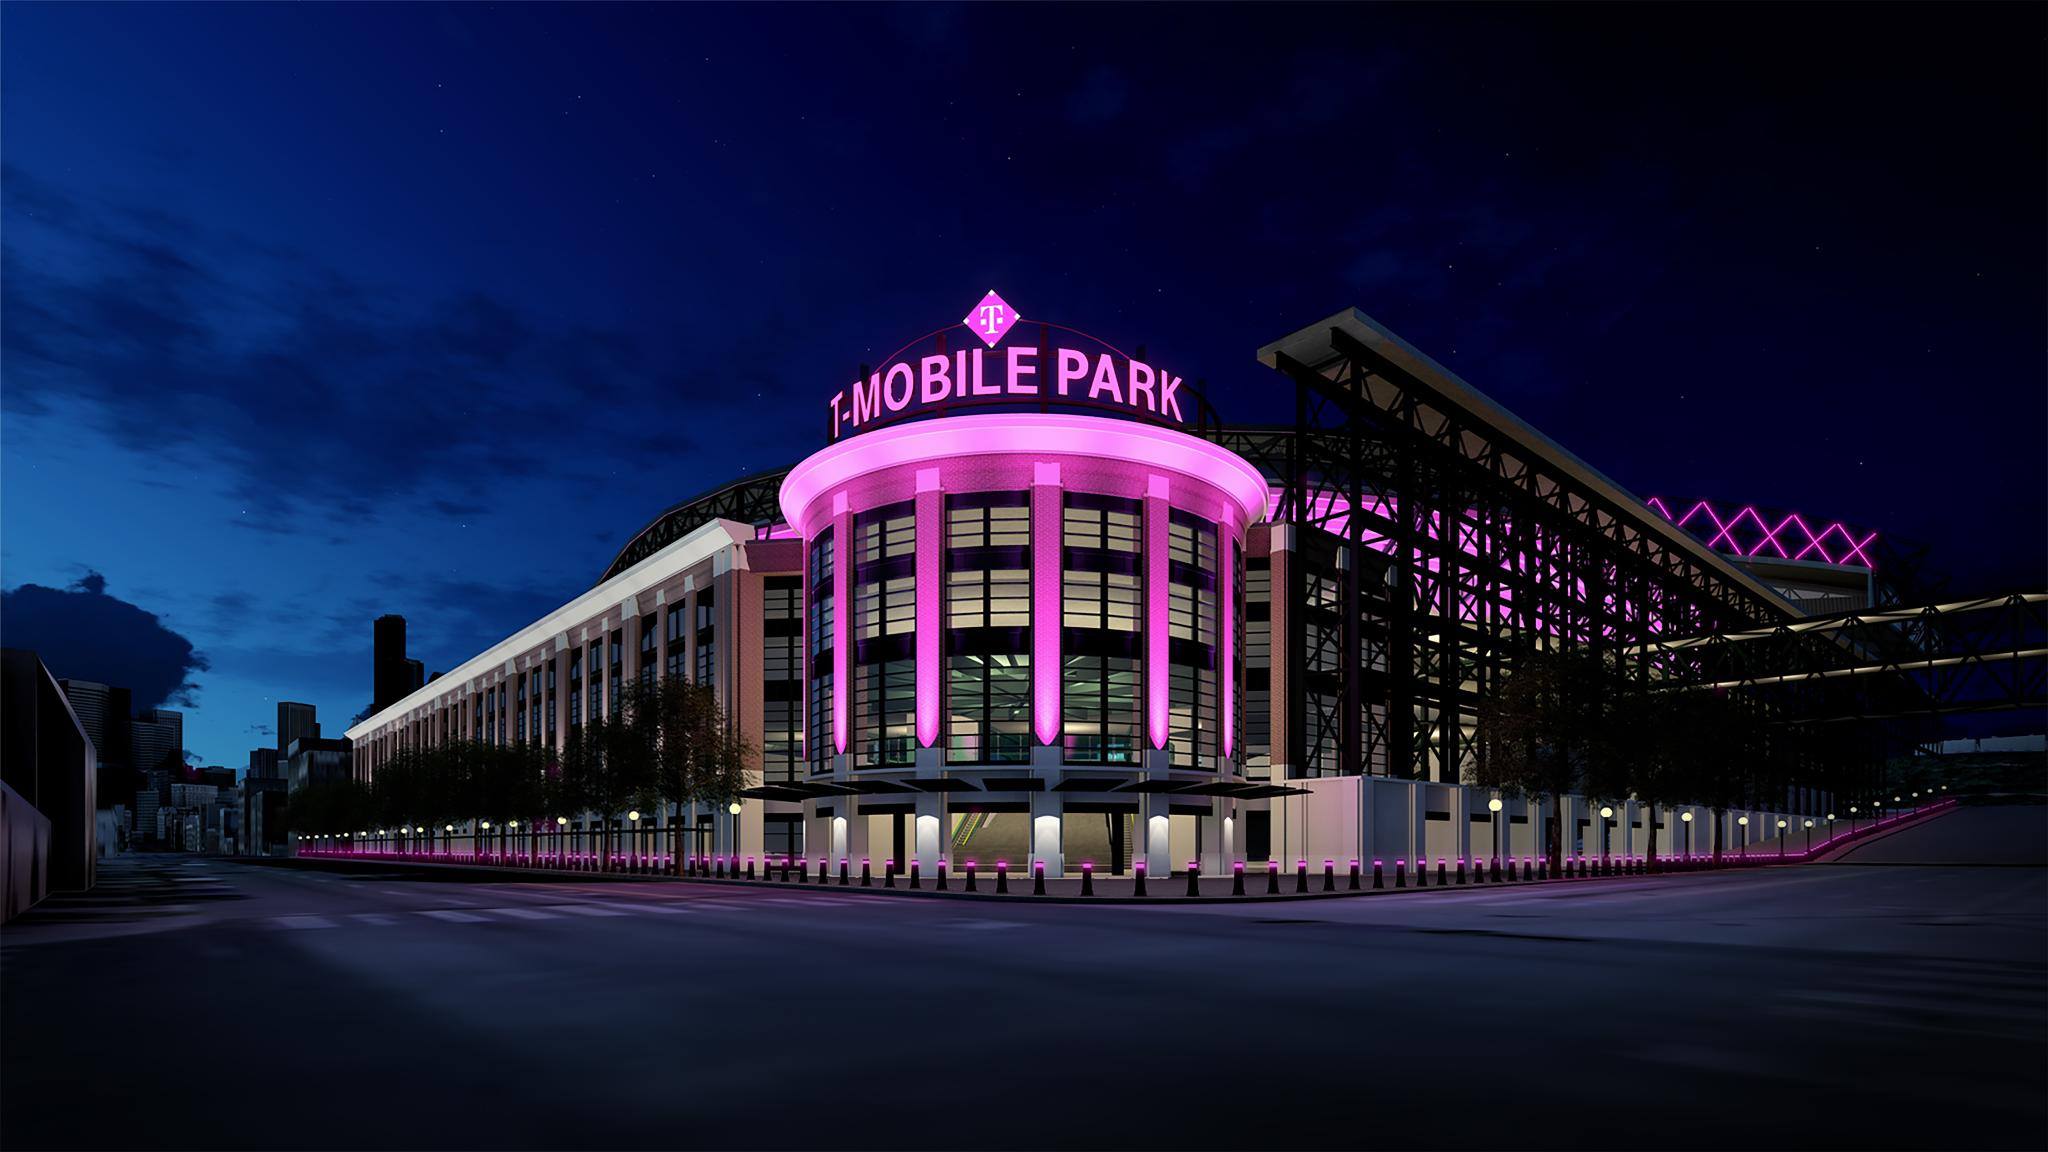 T-Mo confirms increased capacity at T-Mobile Park ahead of MLB Opening Day  2019 - TmoNews